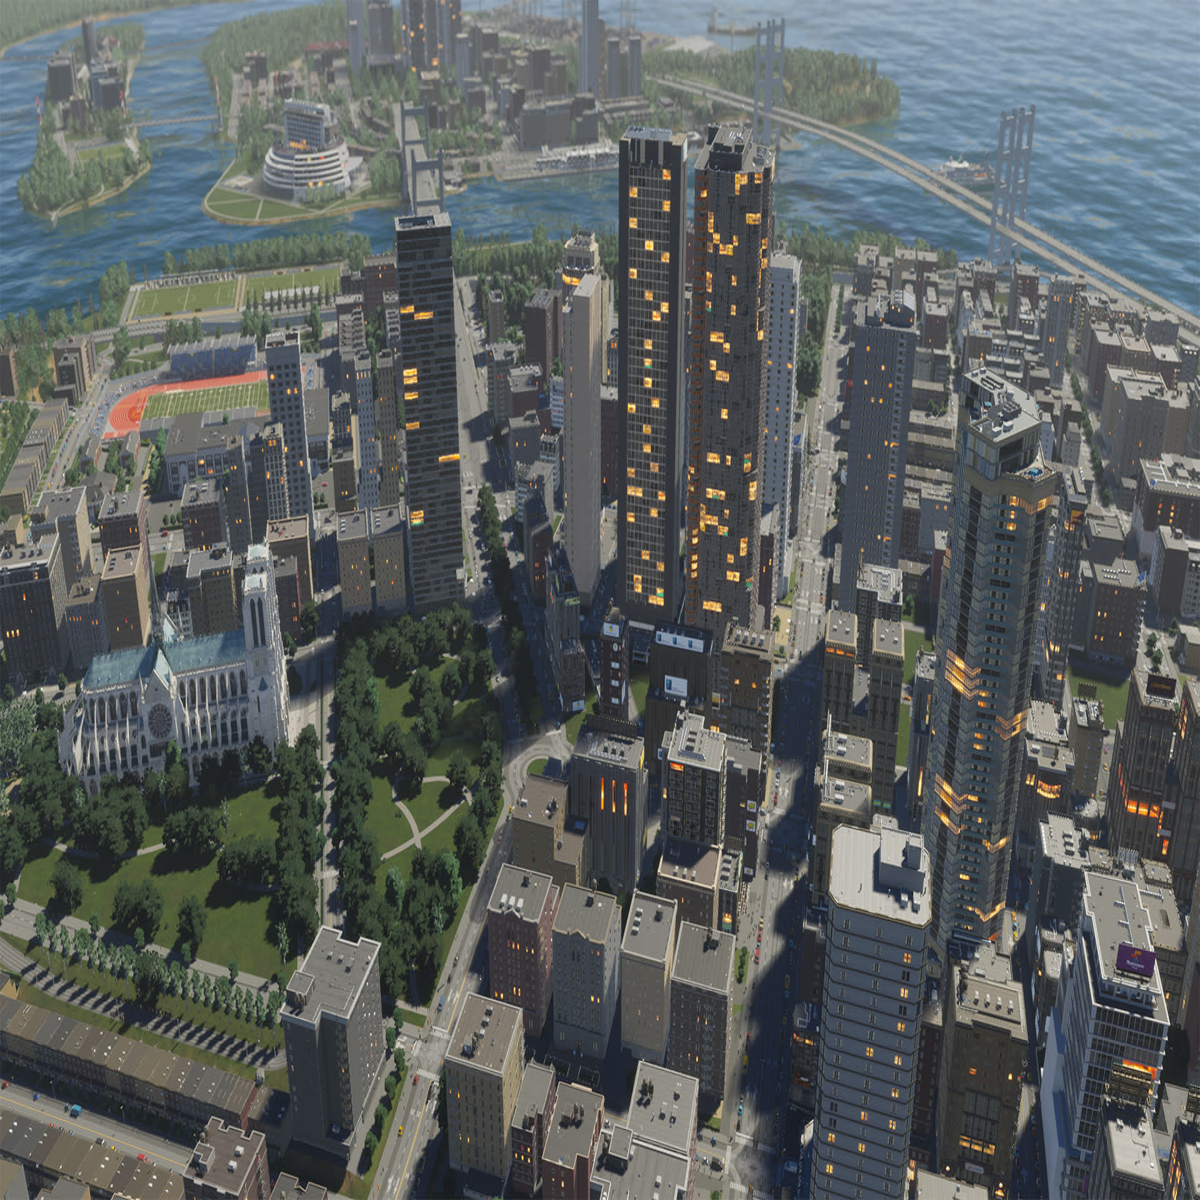 Cities: Skylines 2 Performance Improvements Planned for Post-Launch